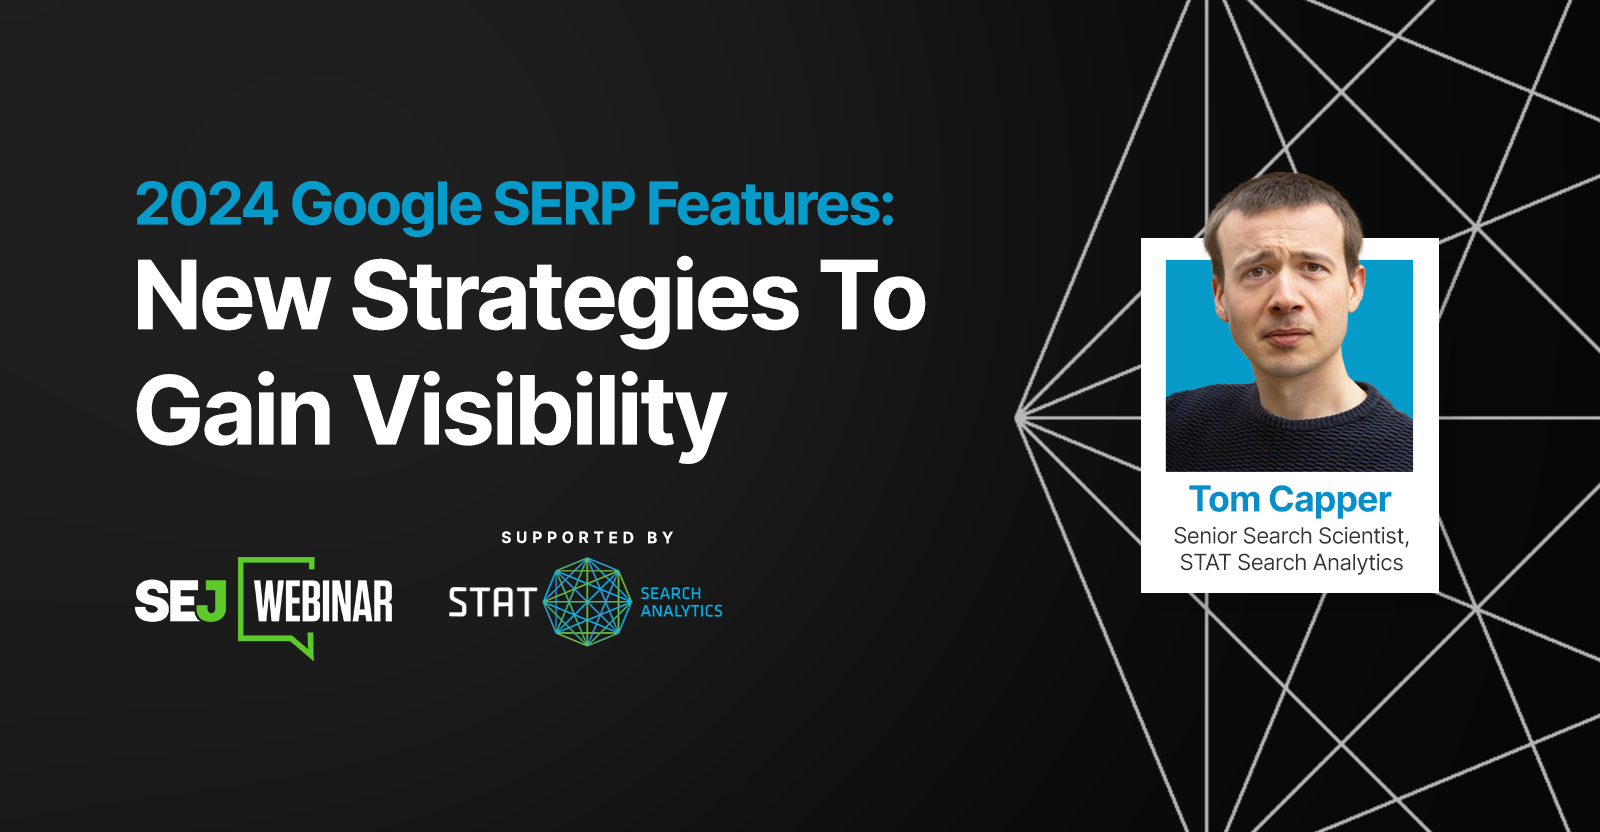 2024 Google SERP Features: New Strategies To Gain Visibility via @sejournal, @lorenbaker